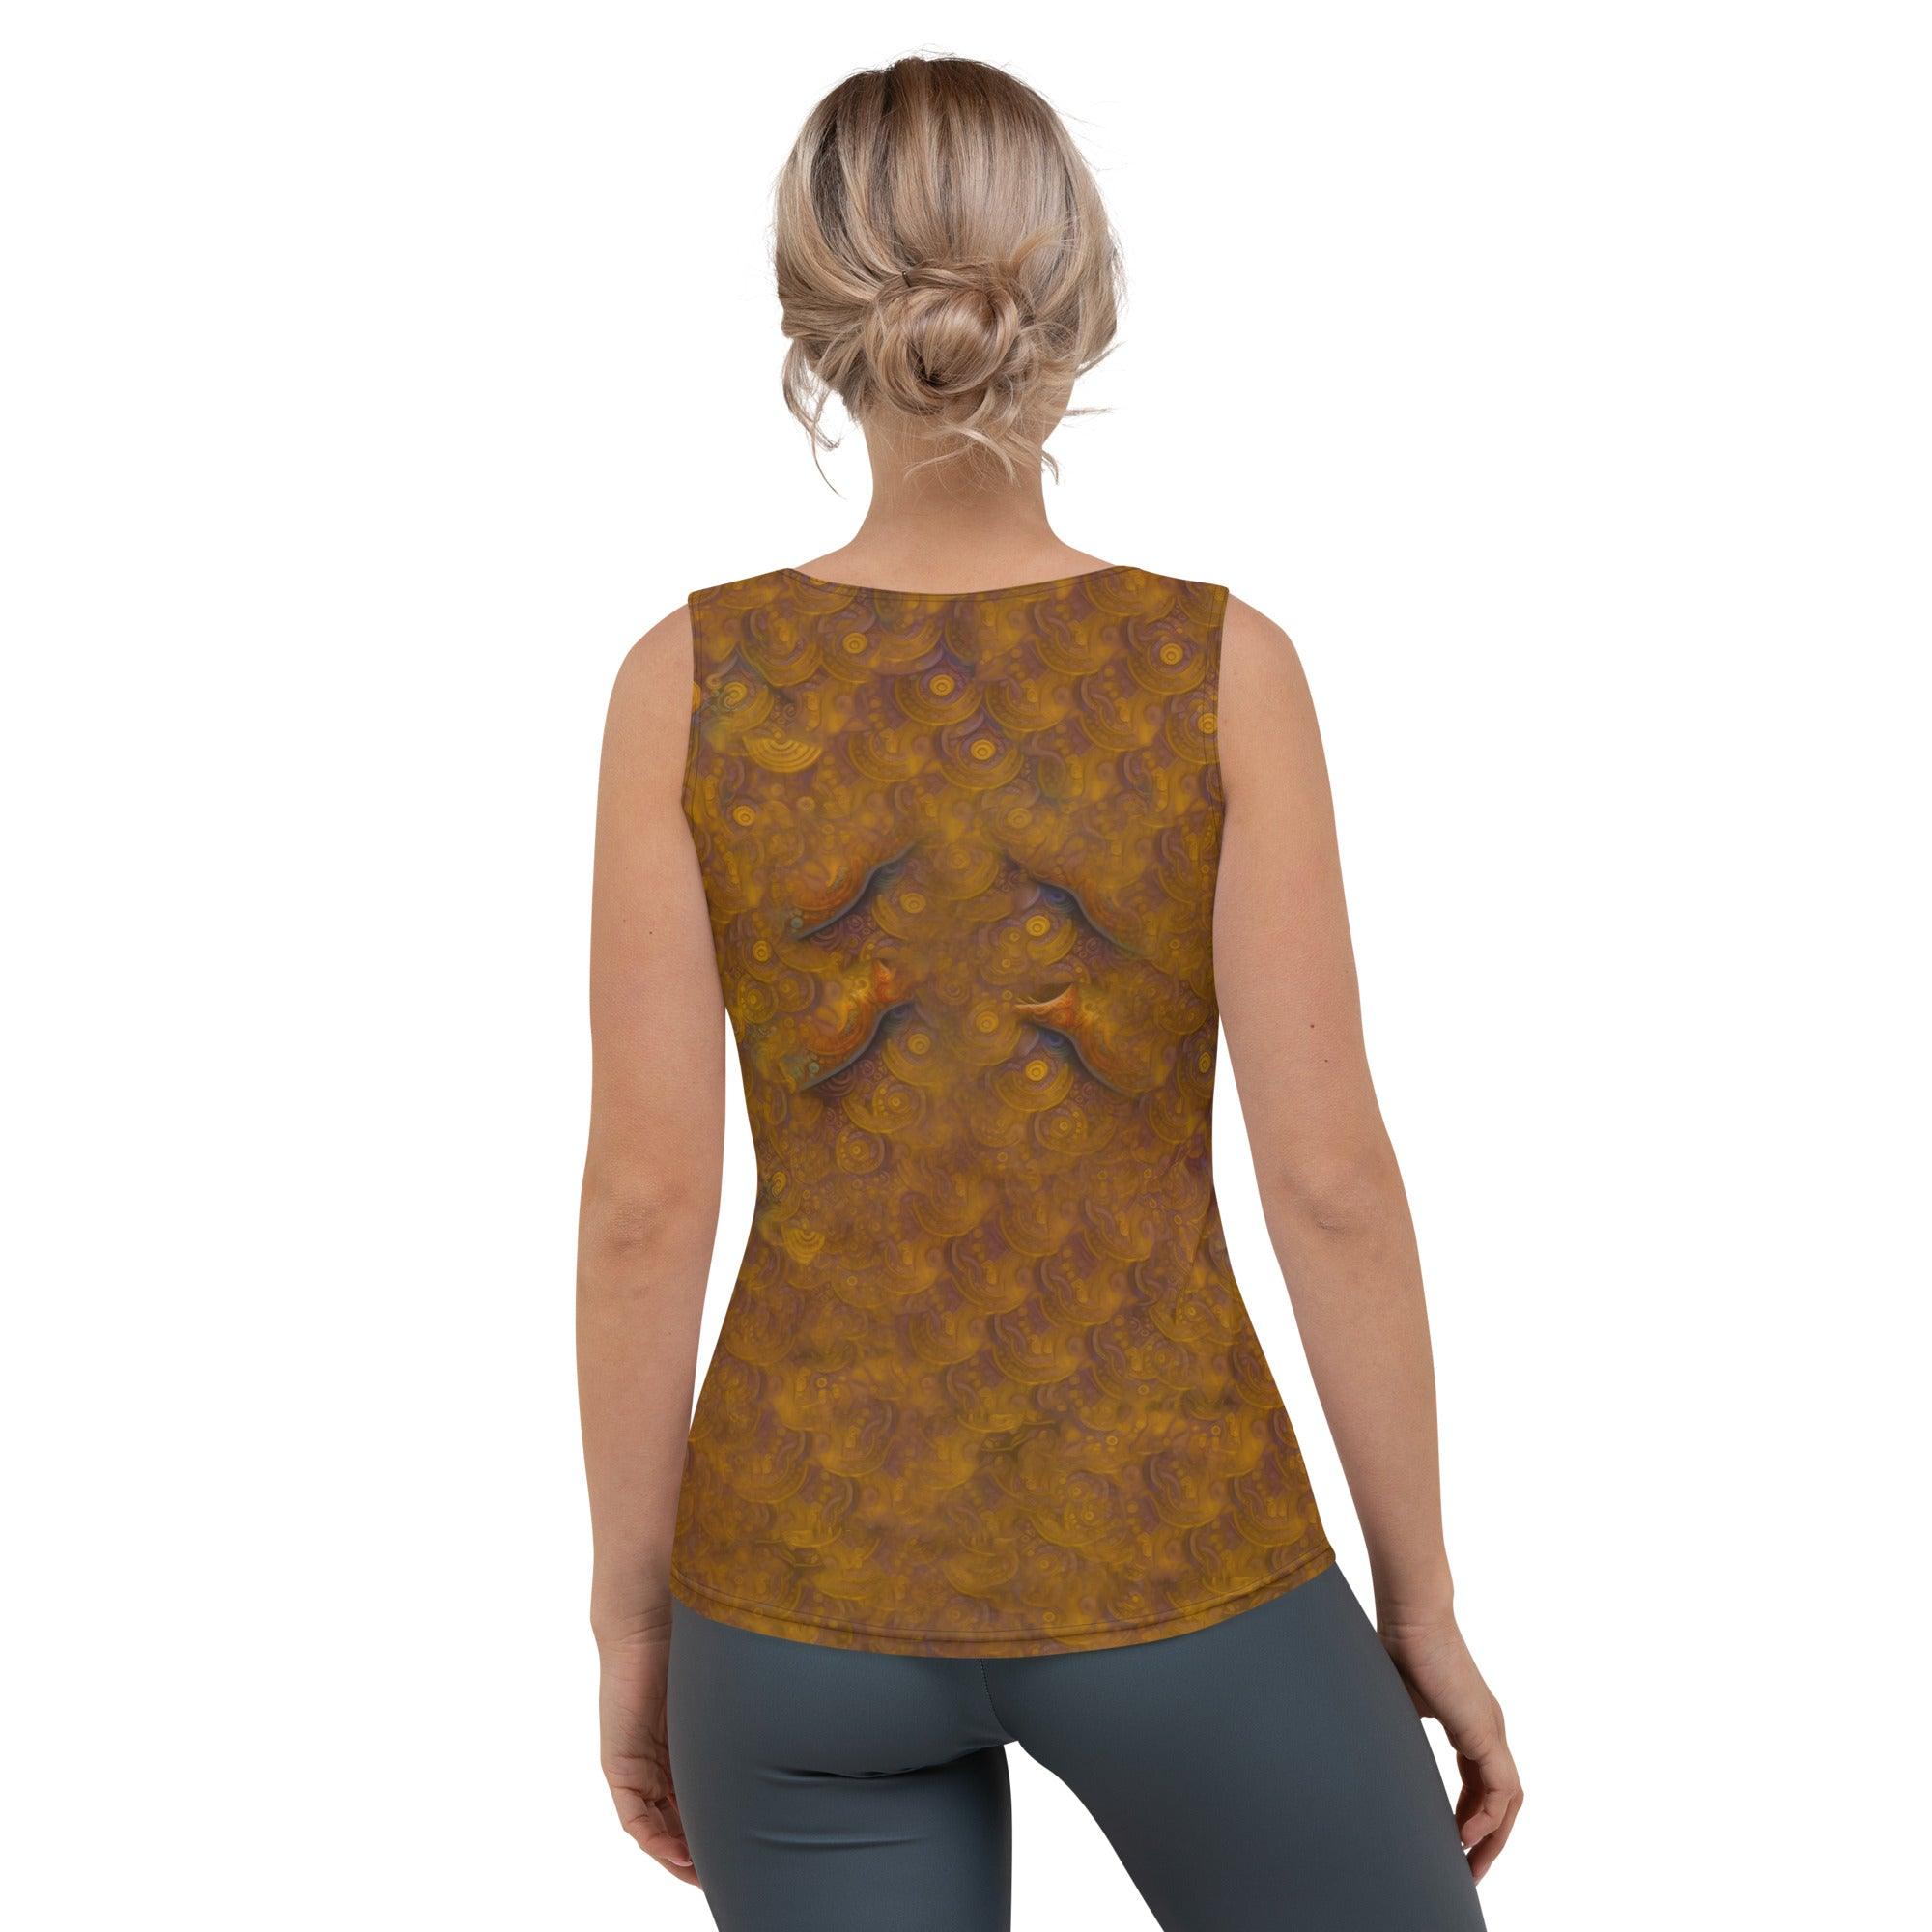 Sunset Serenade Sublimation Cut & Sew Tank Top - Beyond T-shirts